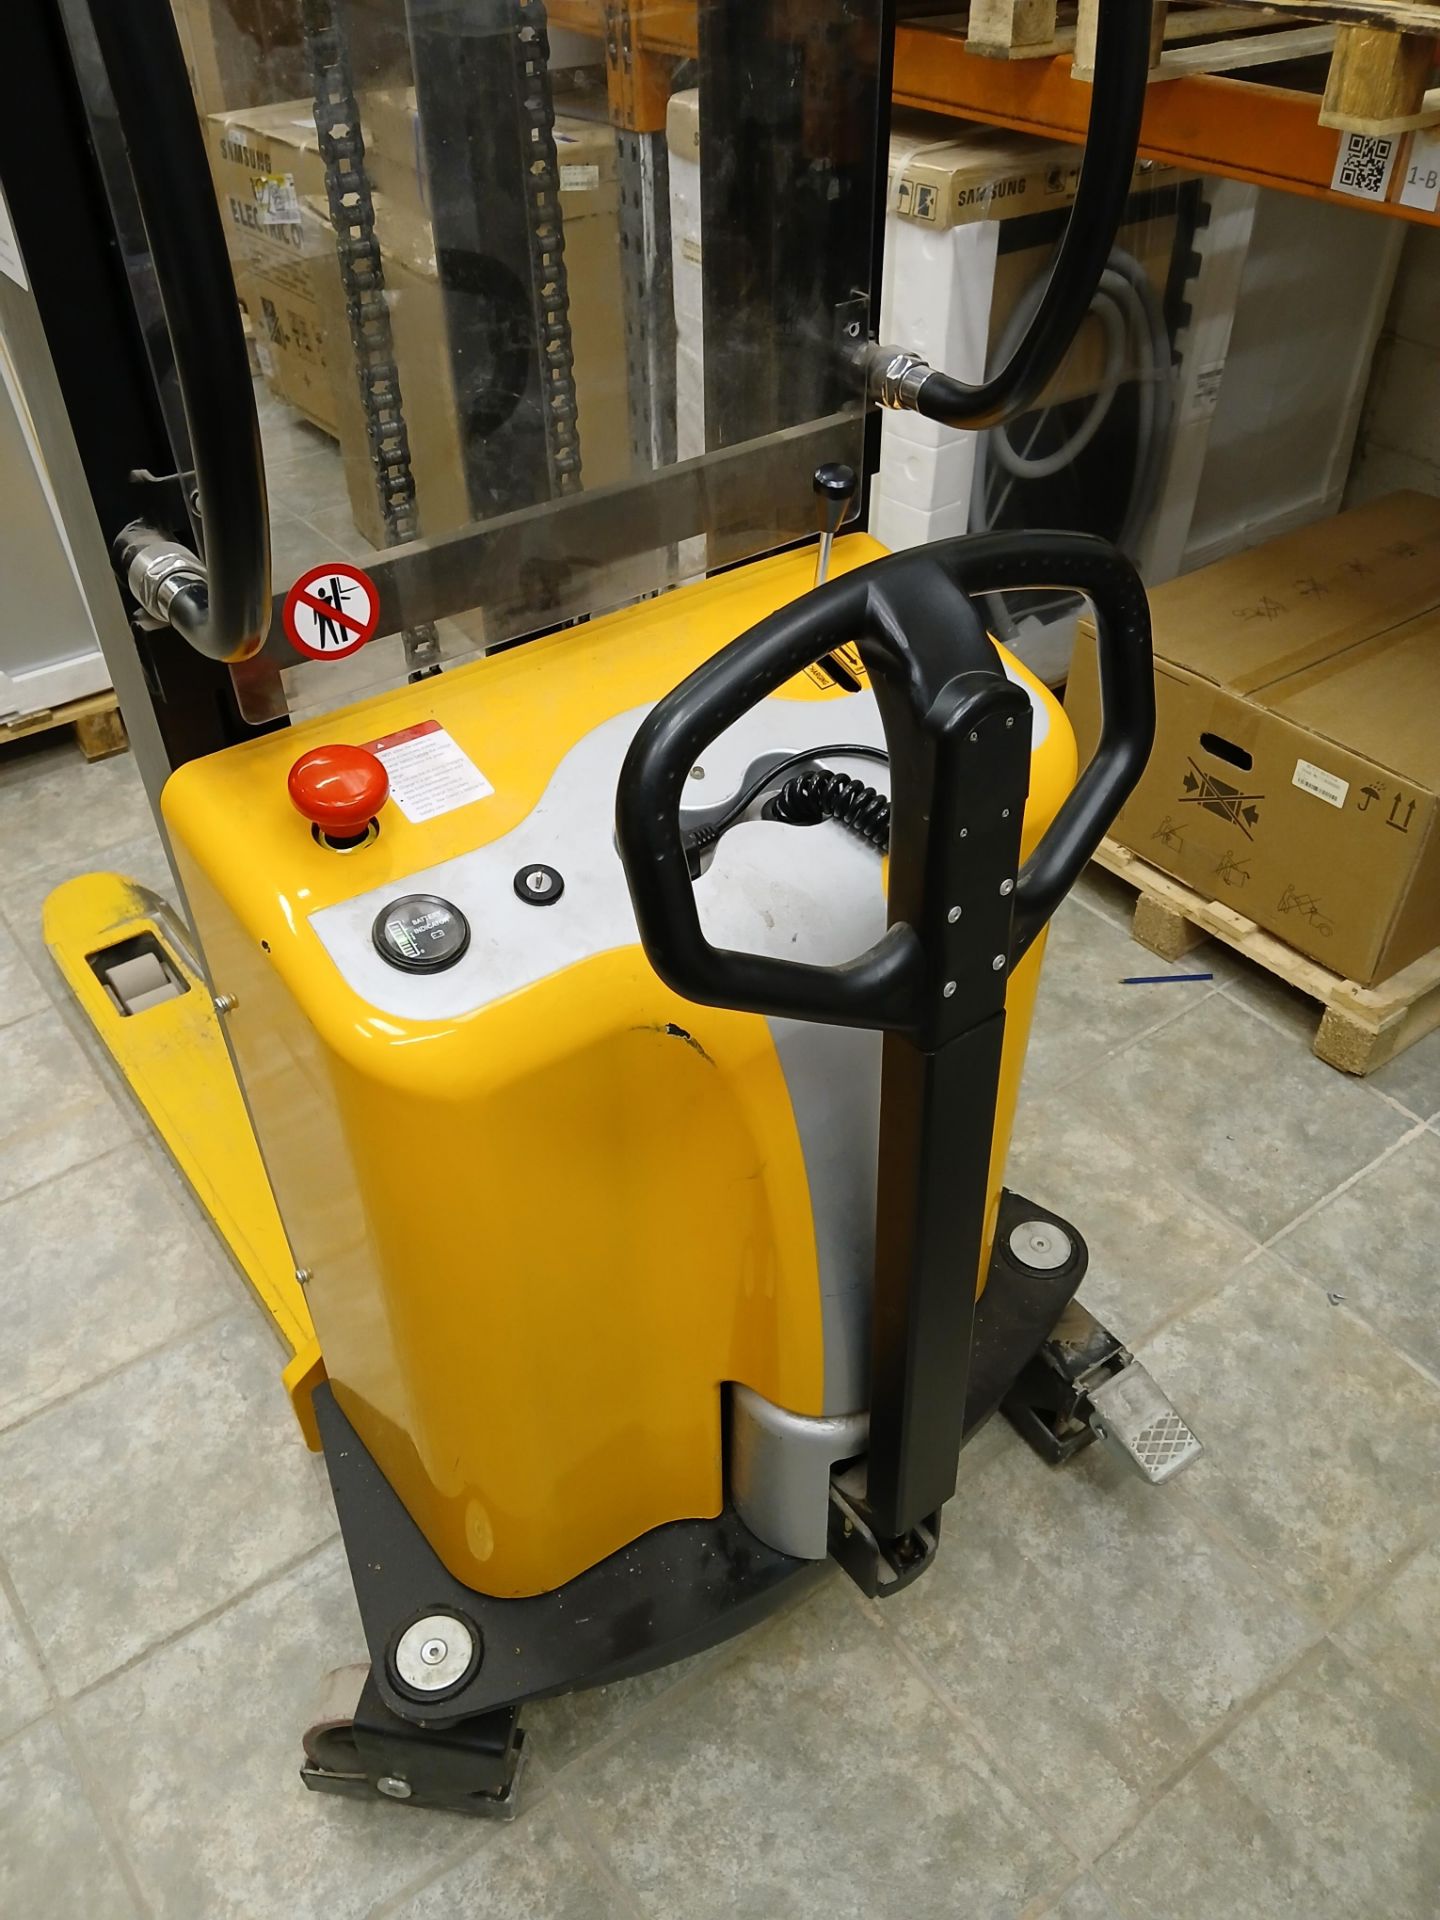 Unbadged SPM1025 Electric Pallet Truck, Year 2019, Serial Number 25190400748, Rated Capacity - Image 2 of 7